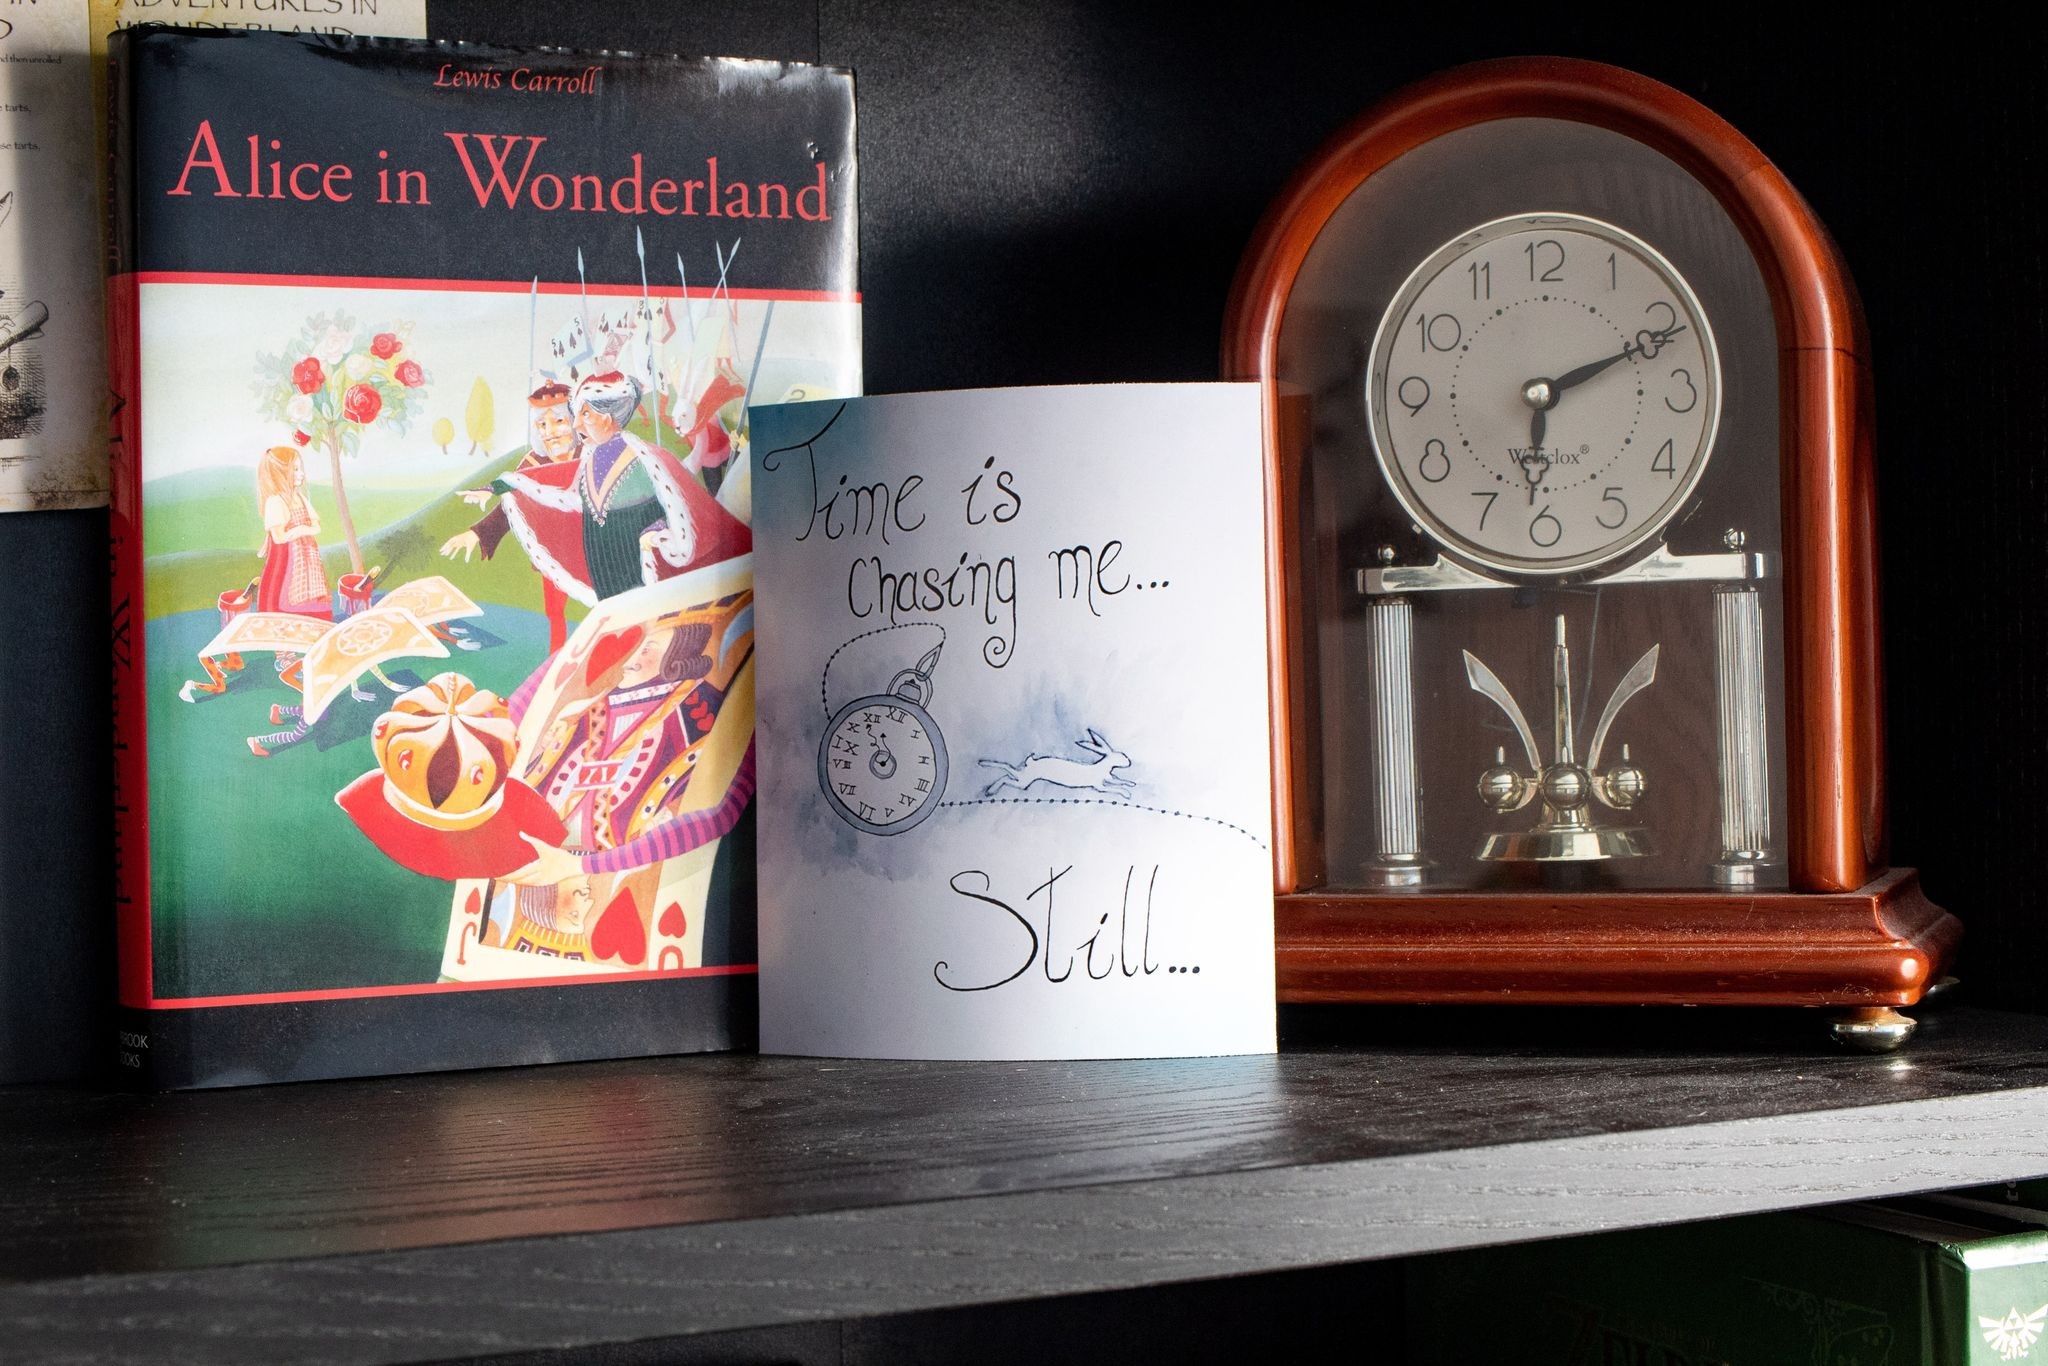 Product image of "Time is Chasing Me" print one  a bookshelf sitting in between an old fashioned clock and a copy of Alice in Wonderland by Lewis Carroll